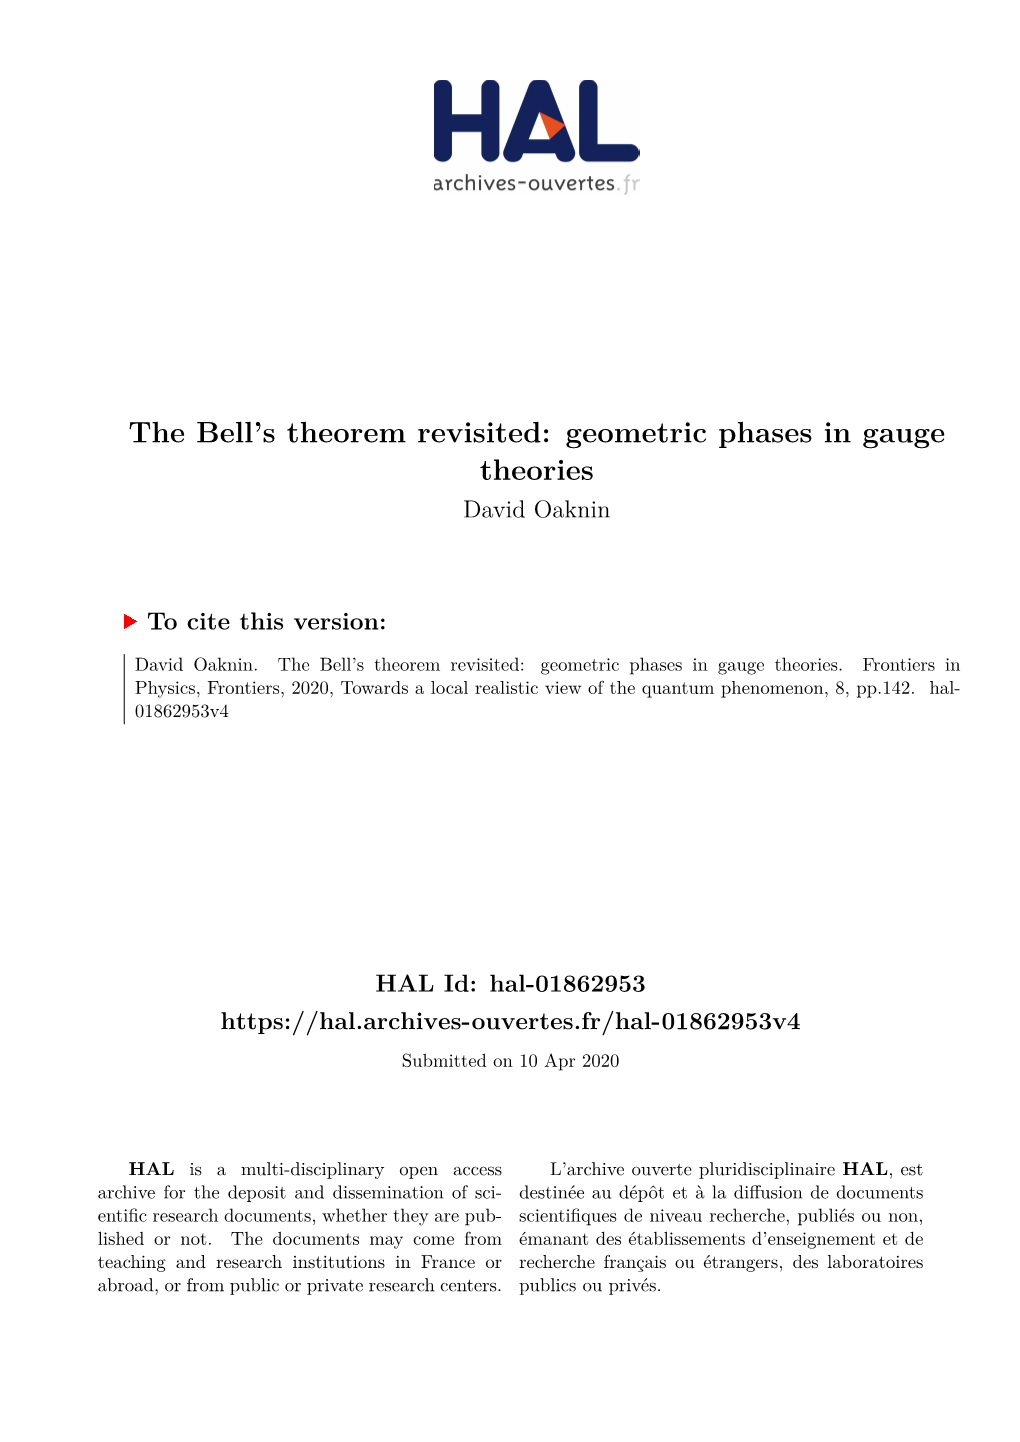 The Bell's Theorem Revisited: Geometric Phases in Gauge Theories